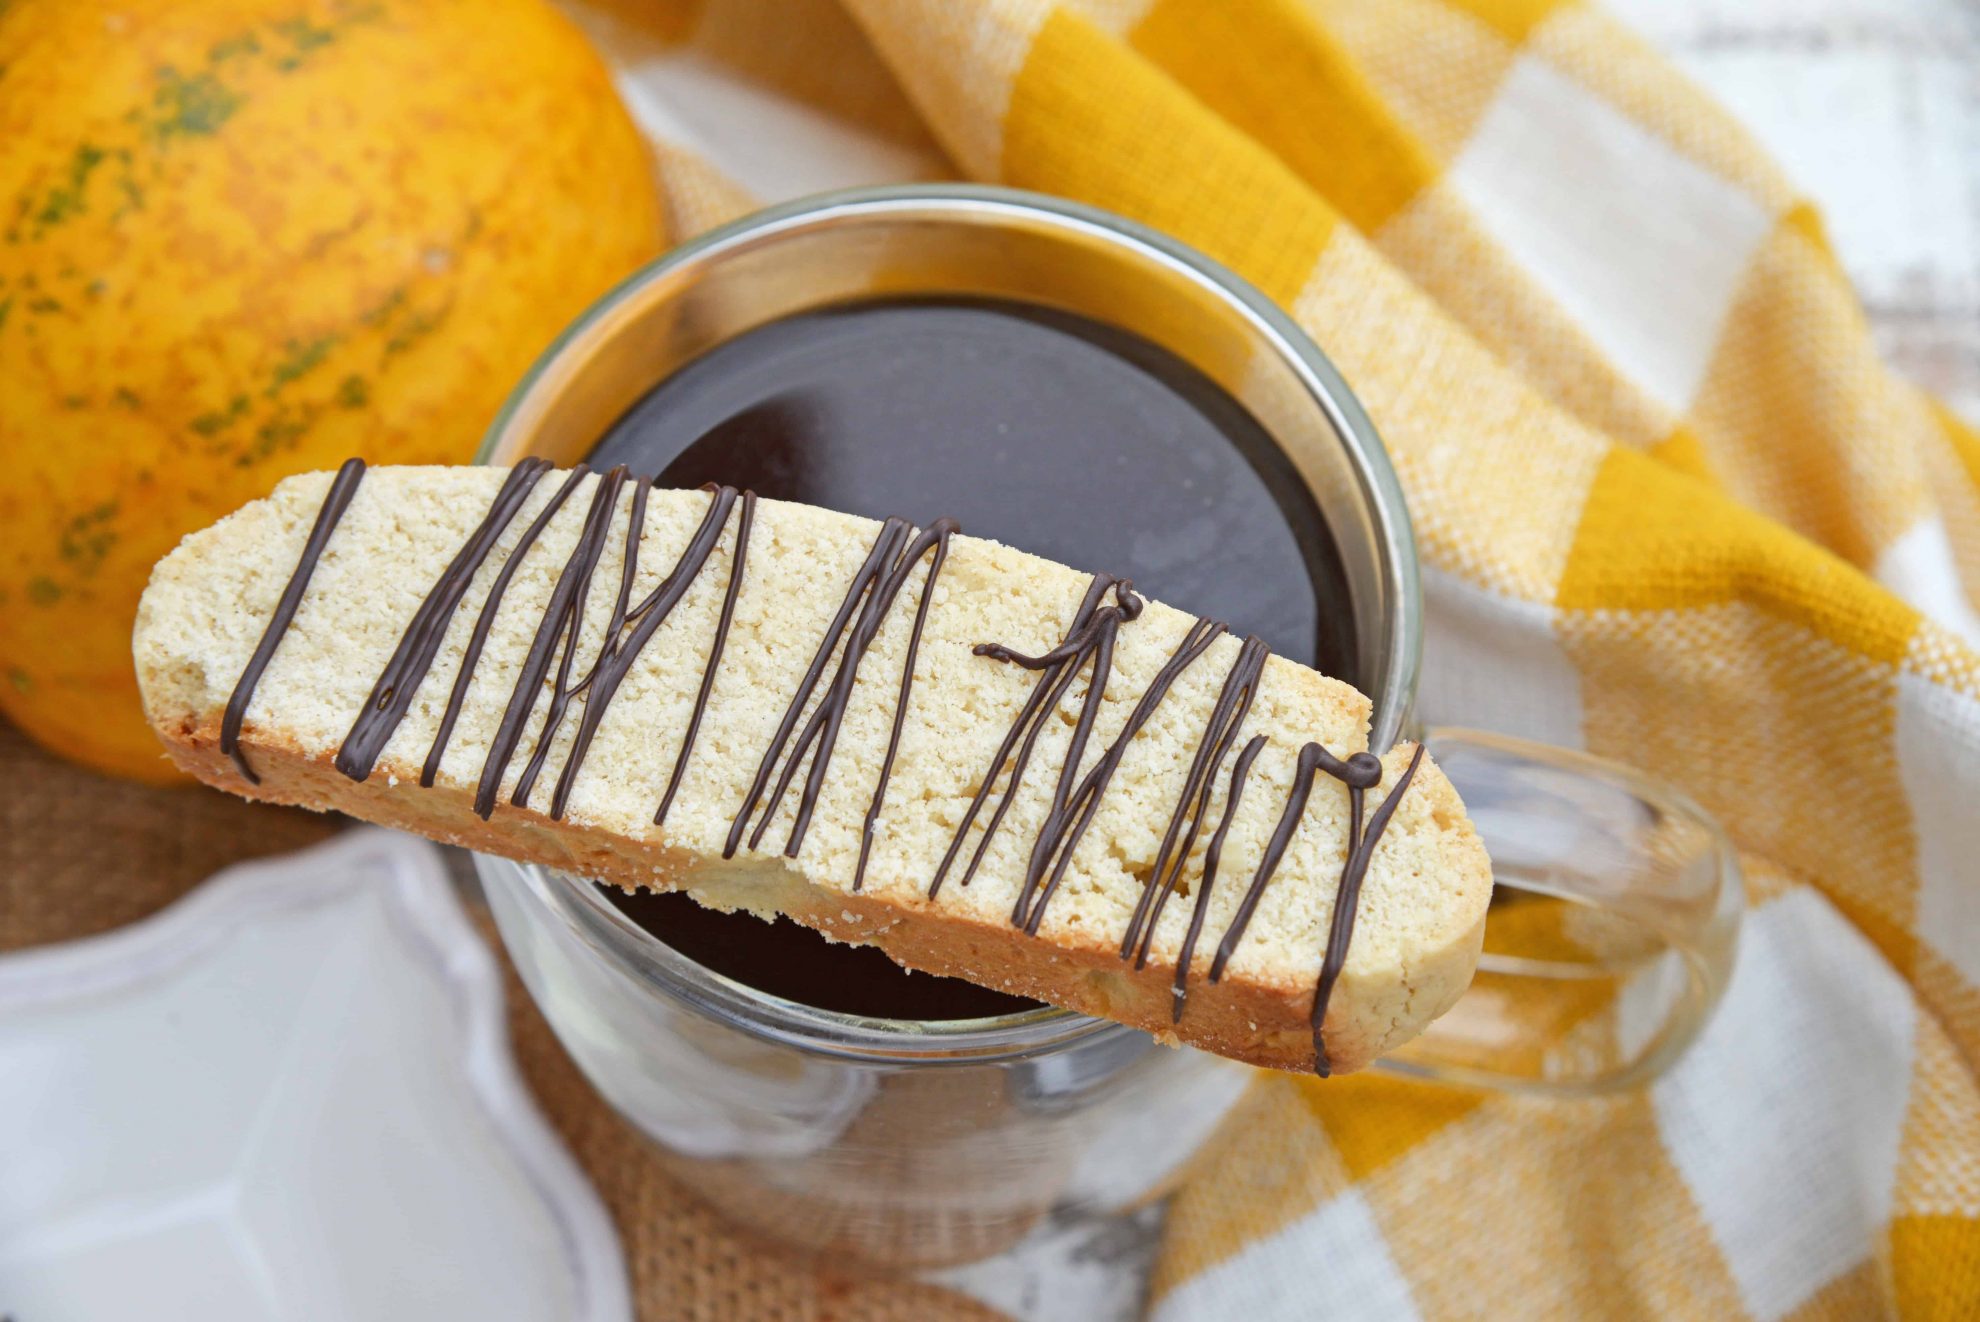 Vanilla Mocha Biscotti are easy to make and perfect for pairing with coffee or tea. Subtle coffee, vanilla and chocolate flavors make them suitable for any occasion. #homemadebiscotti #biscottirecipe www.savoryexperiments.com